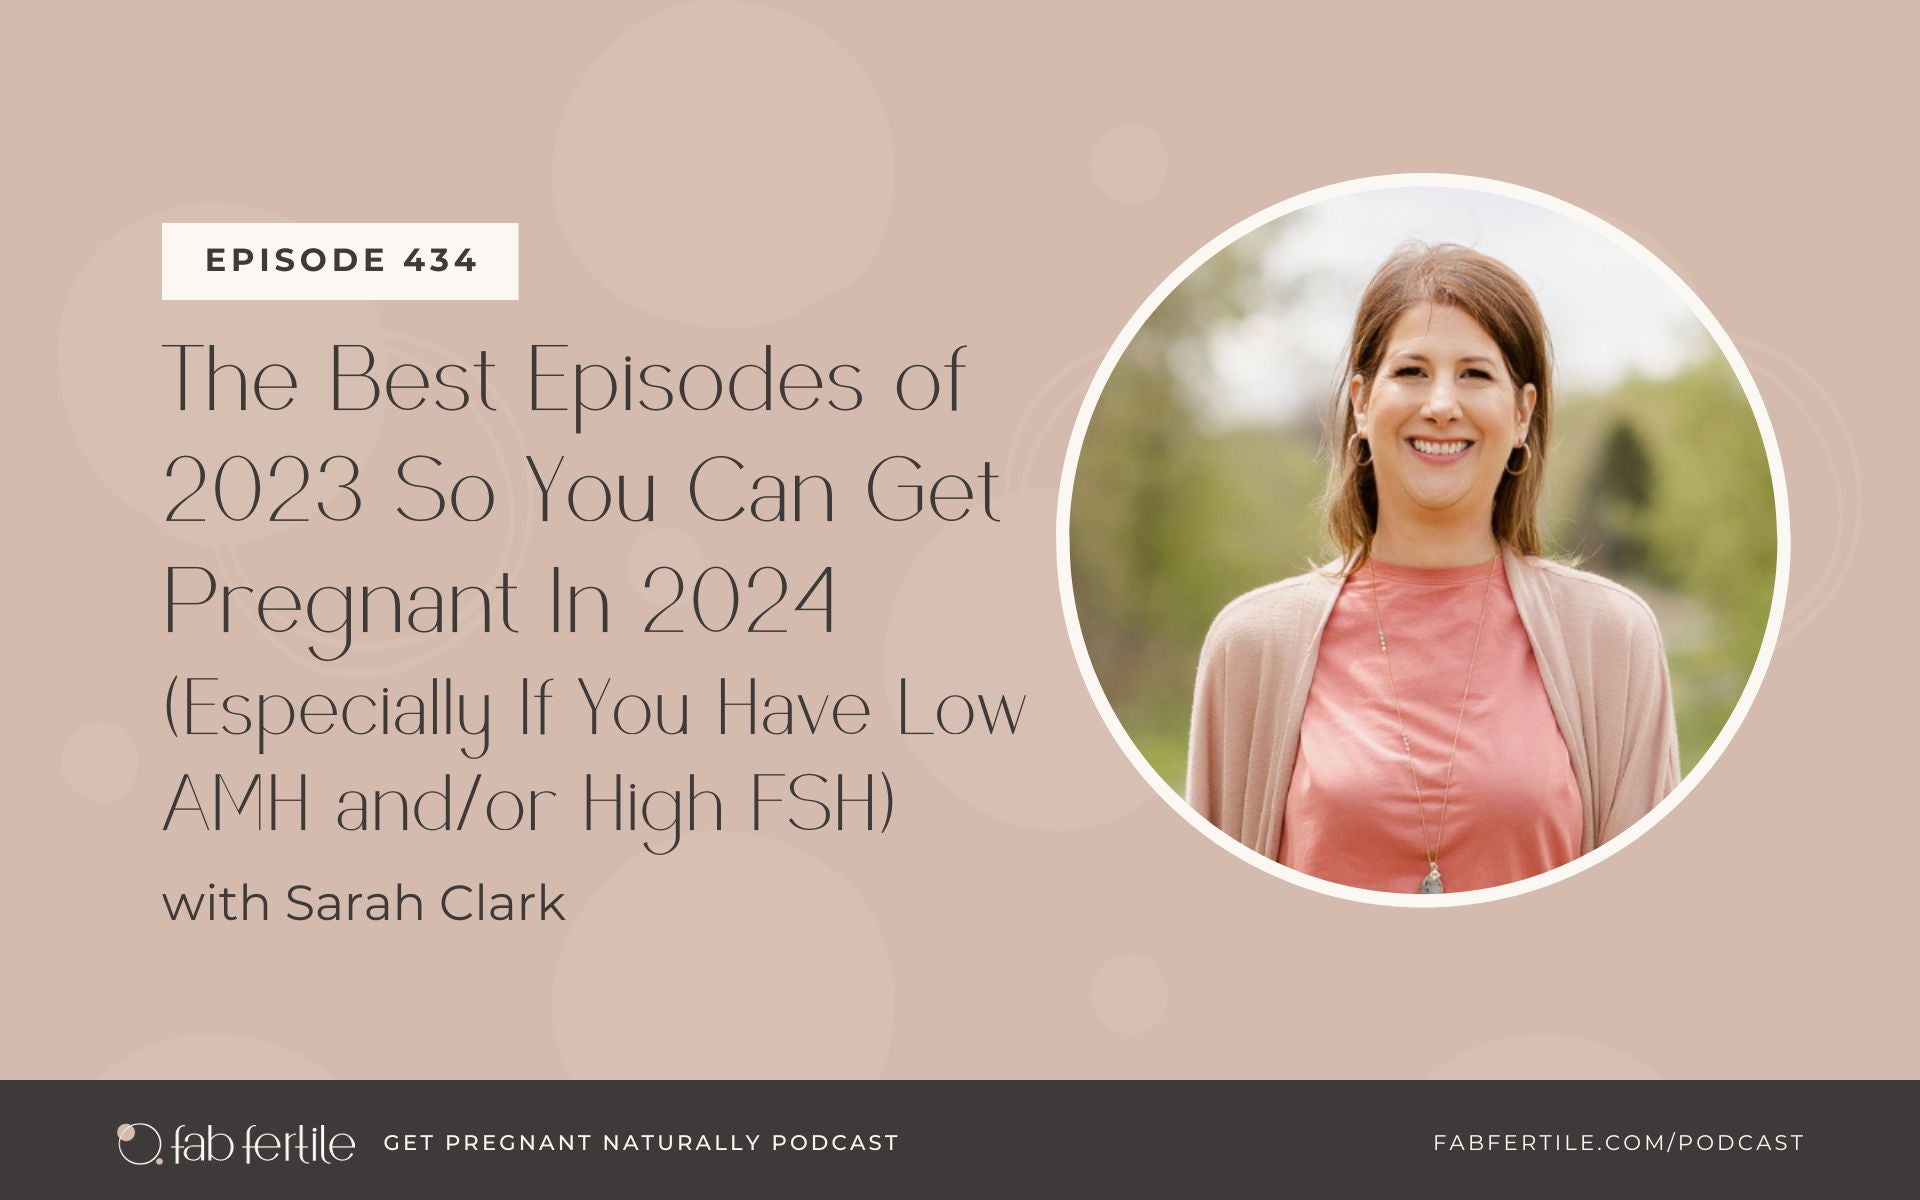 The Best Episodes of 2023 So You Can Get Pregnant In 2024 (Especially If You Have Low AMH and/or High FSH)